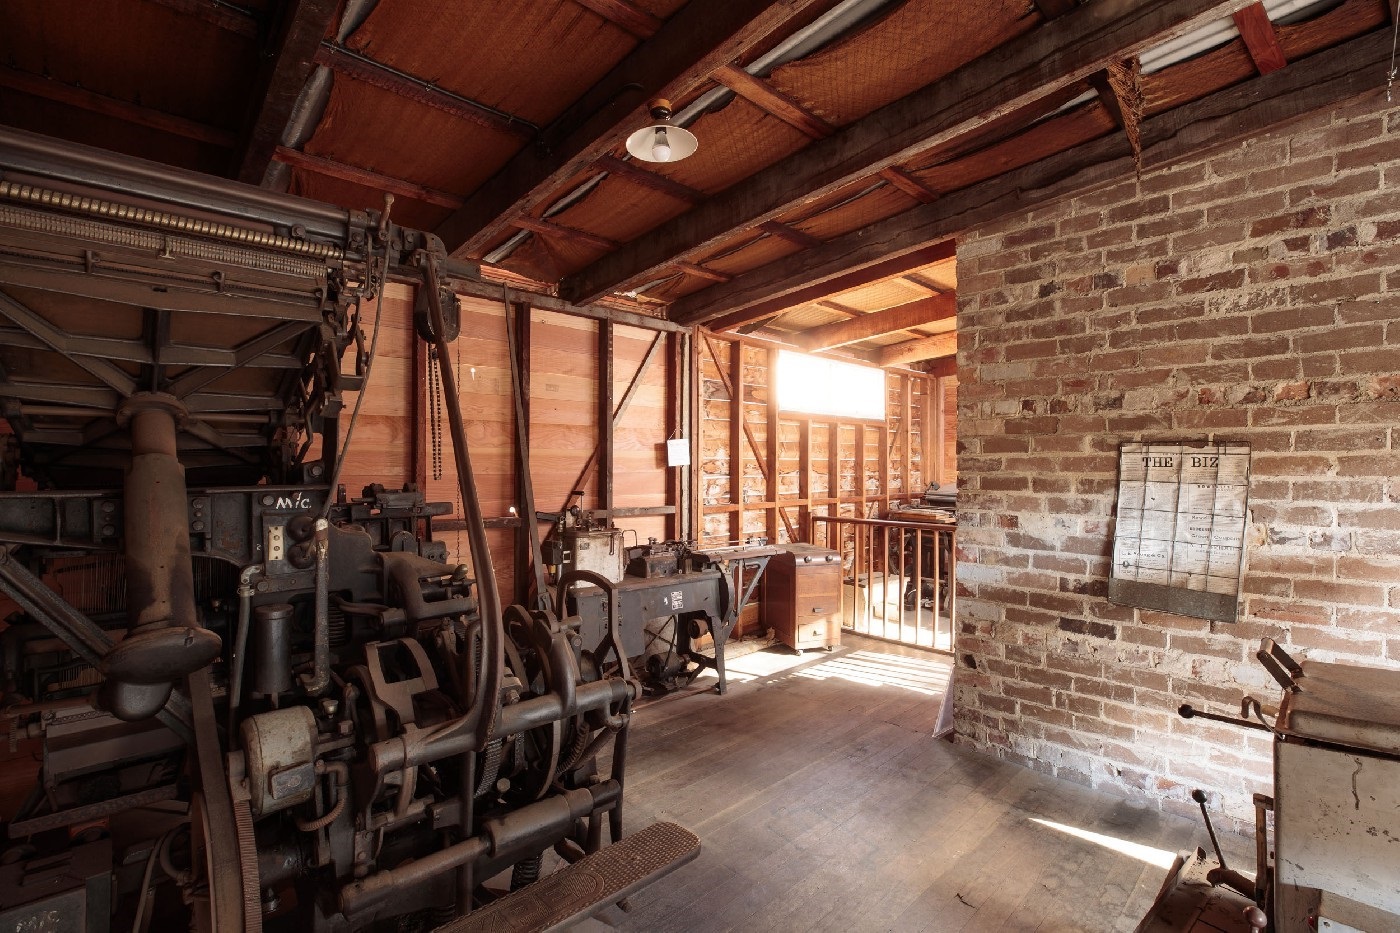 The Museum and gallery blacksmith workshop with brick walls and wooden beams